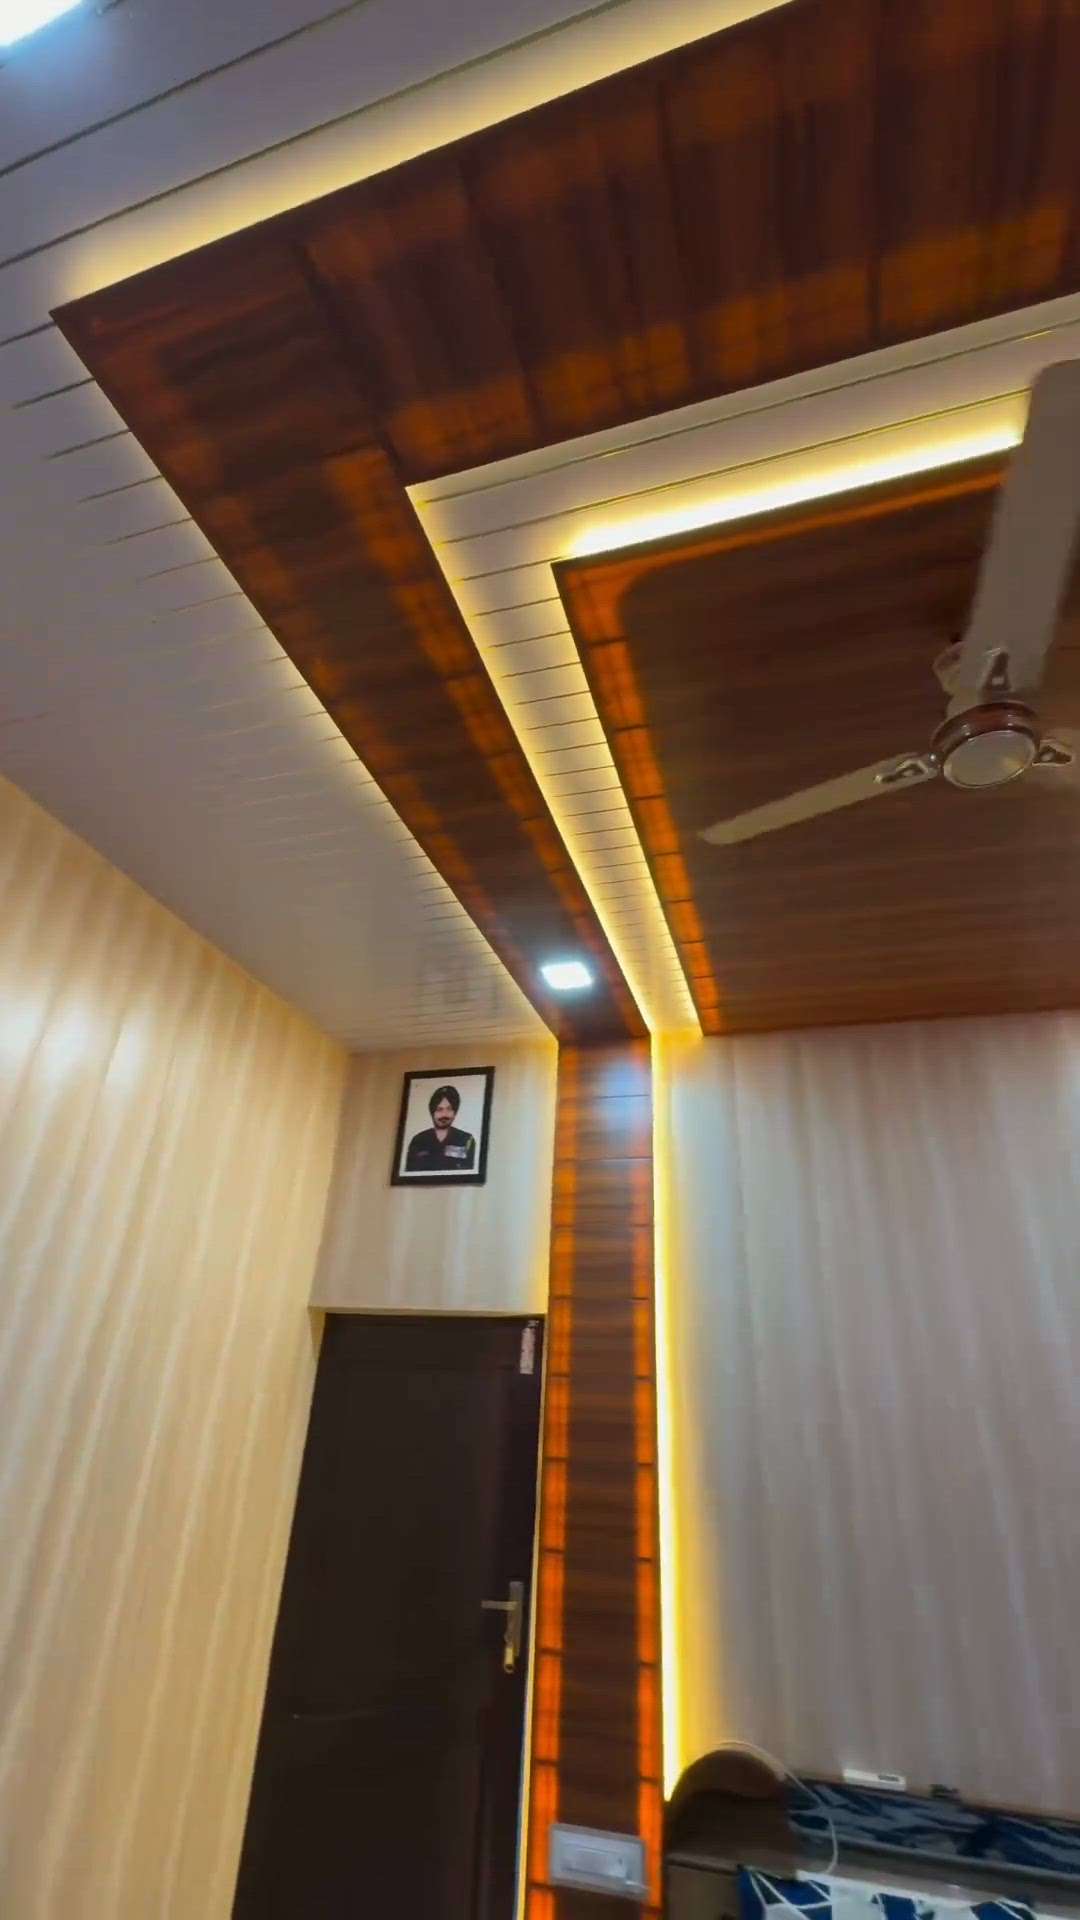 PVC Fall fallceiling✨
All Interior and exterior products are available for more details on Dm.. 
#InteriorDesigner #Architectural&Interior #HomeDecor #LivingroomDesigns #PVCFalseCeiling #Pvcpanel #FalseCeiling #WallDecors